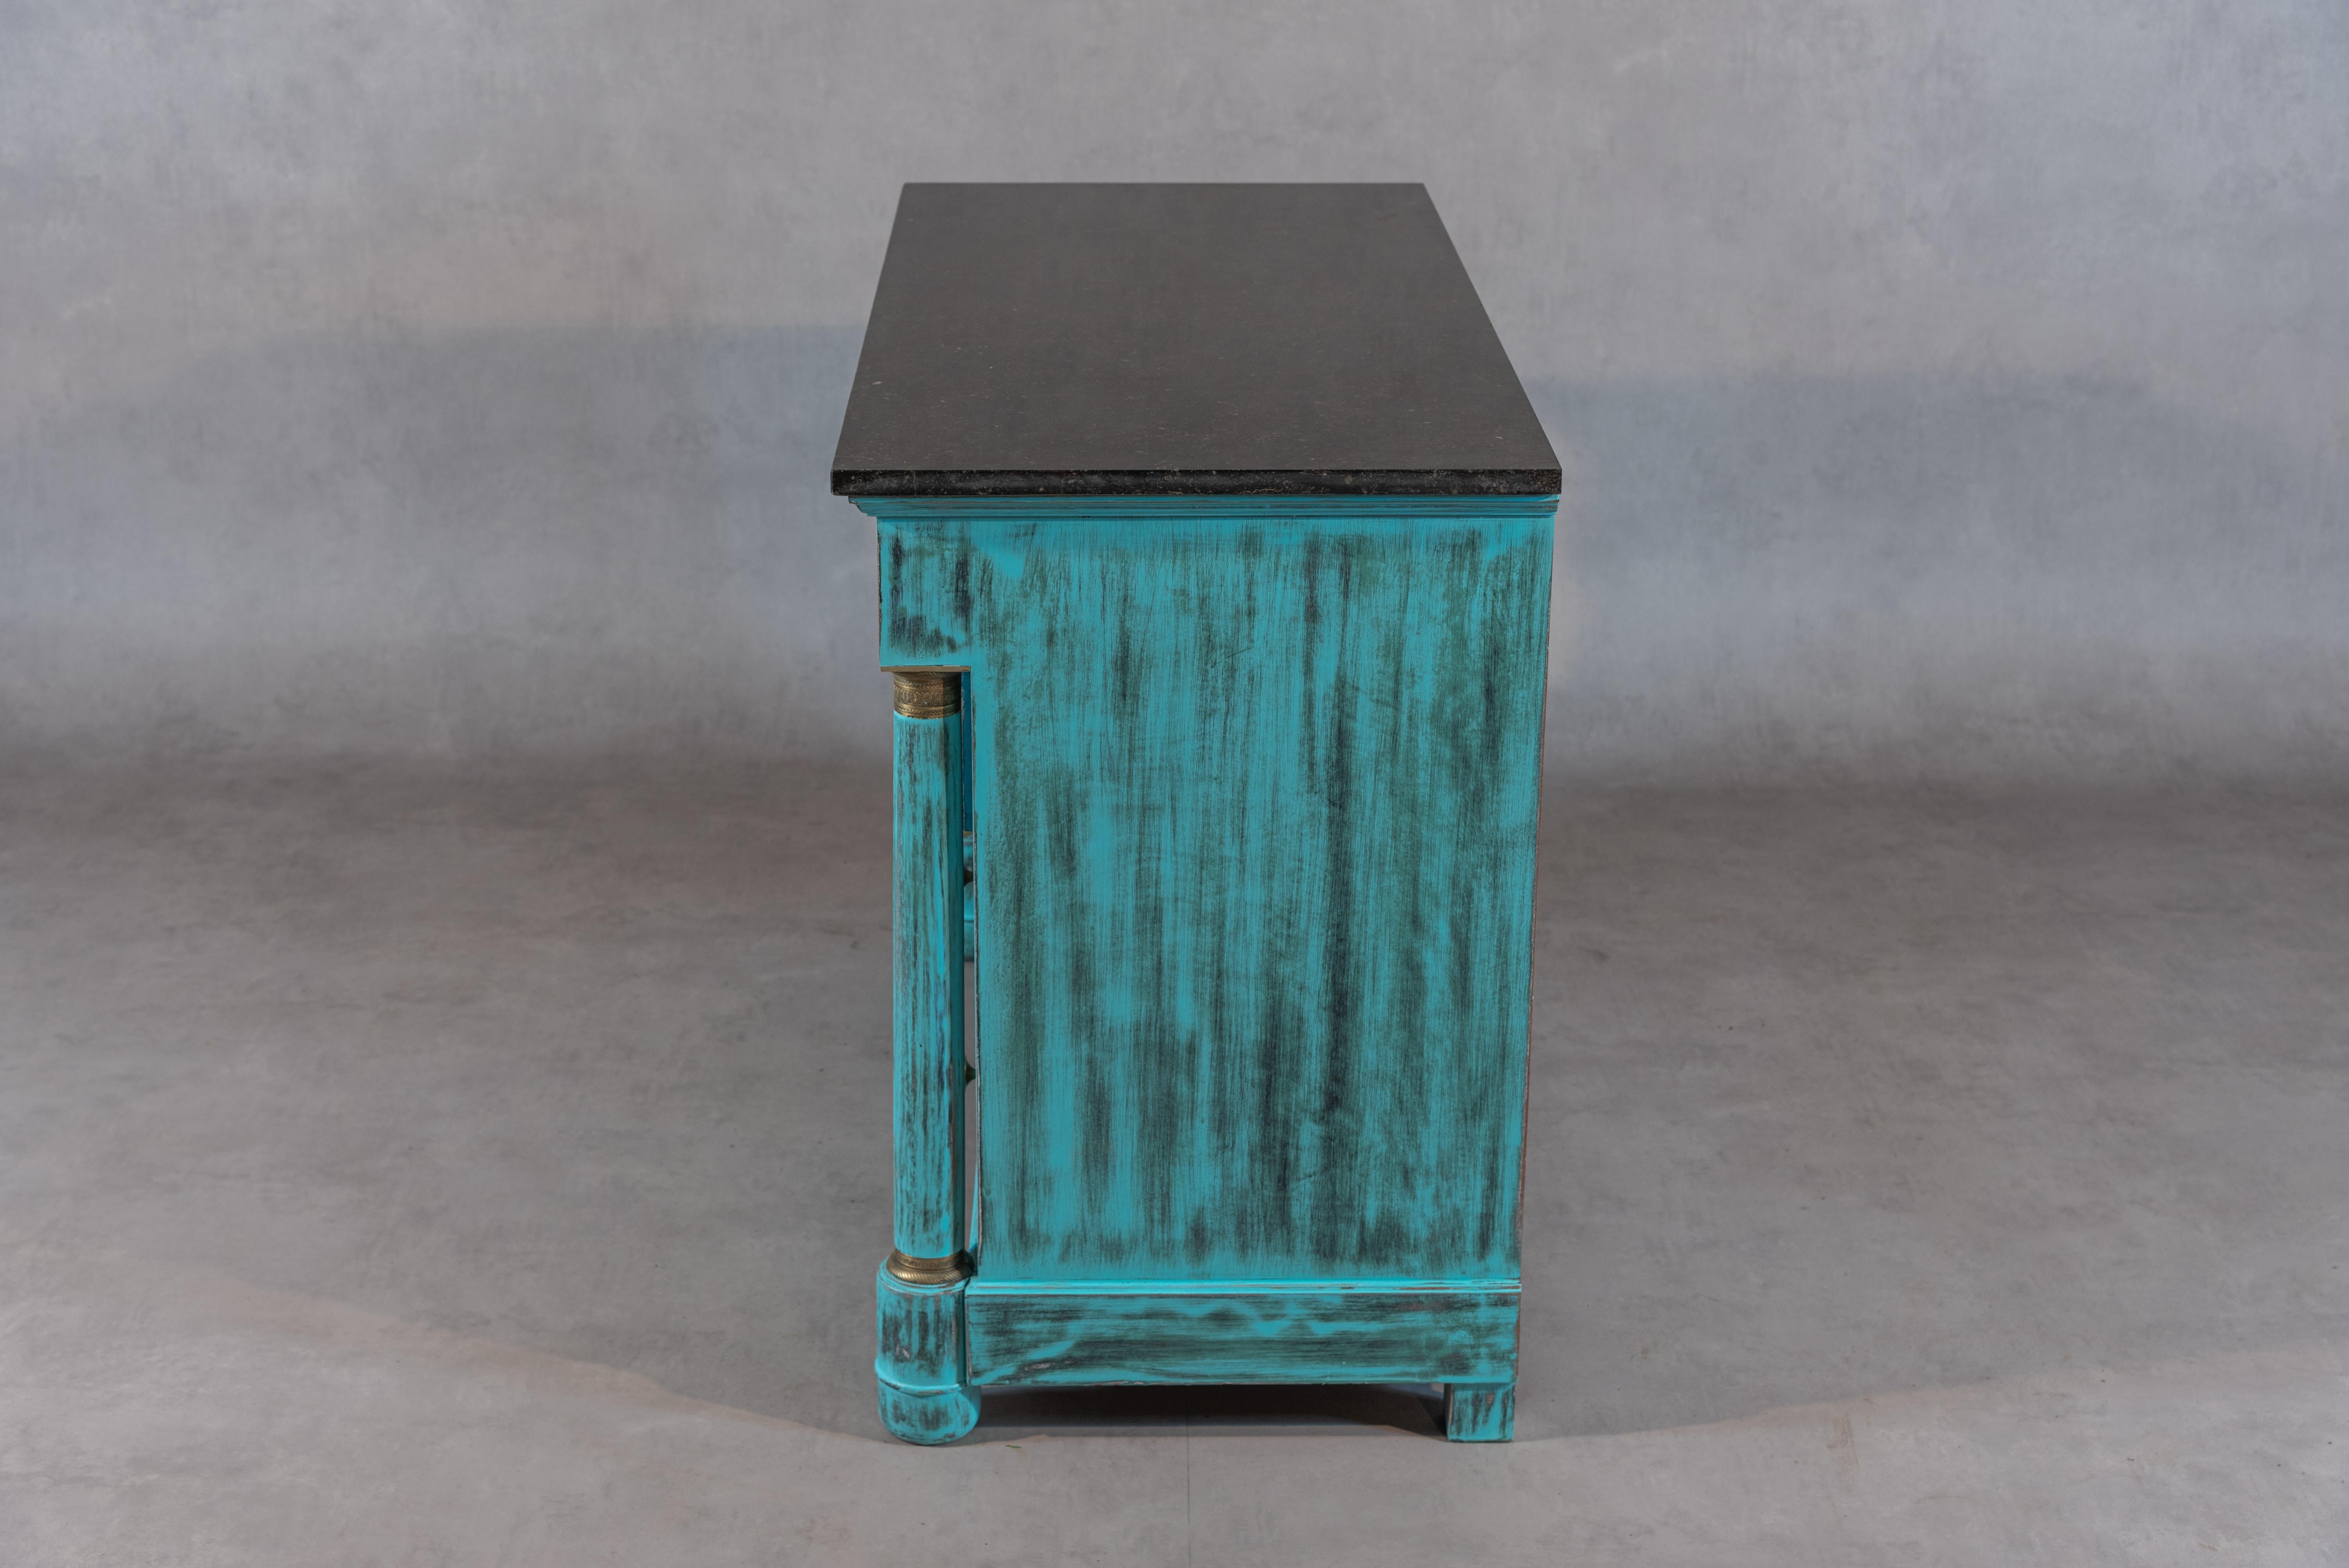 A beautiful French Empire Period Commode. This commode is made with mahogany wood and was professionally sanded, bleached, and painted in a unique turquoise patina. This commode has a marble top, exquisite brass features, and four ample drawers. It